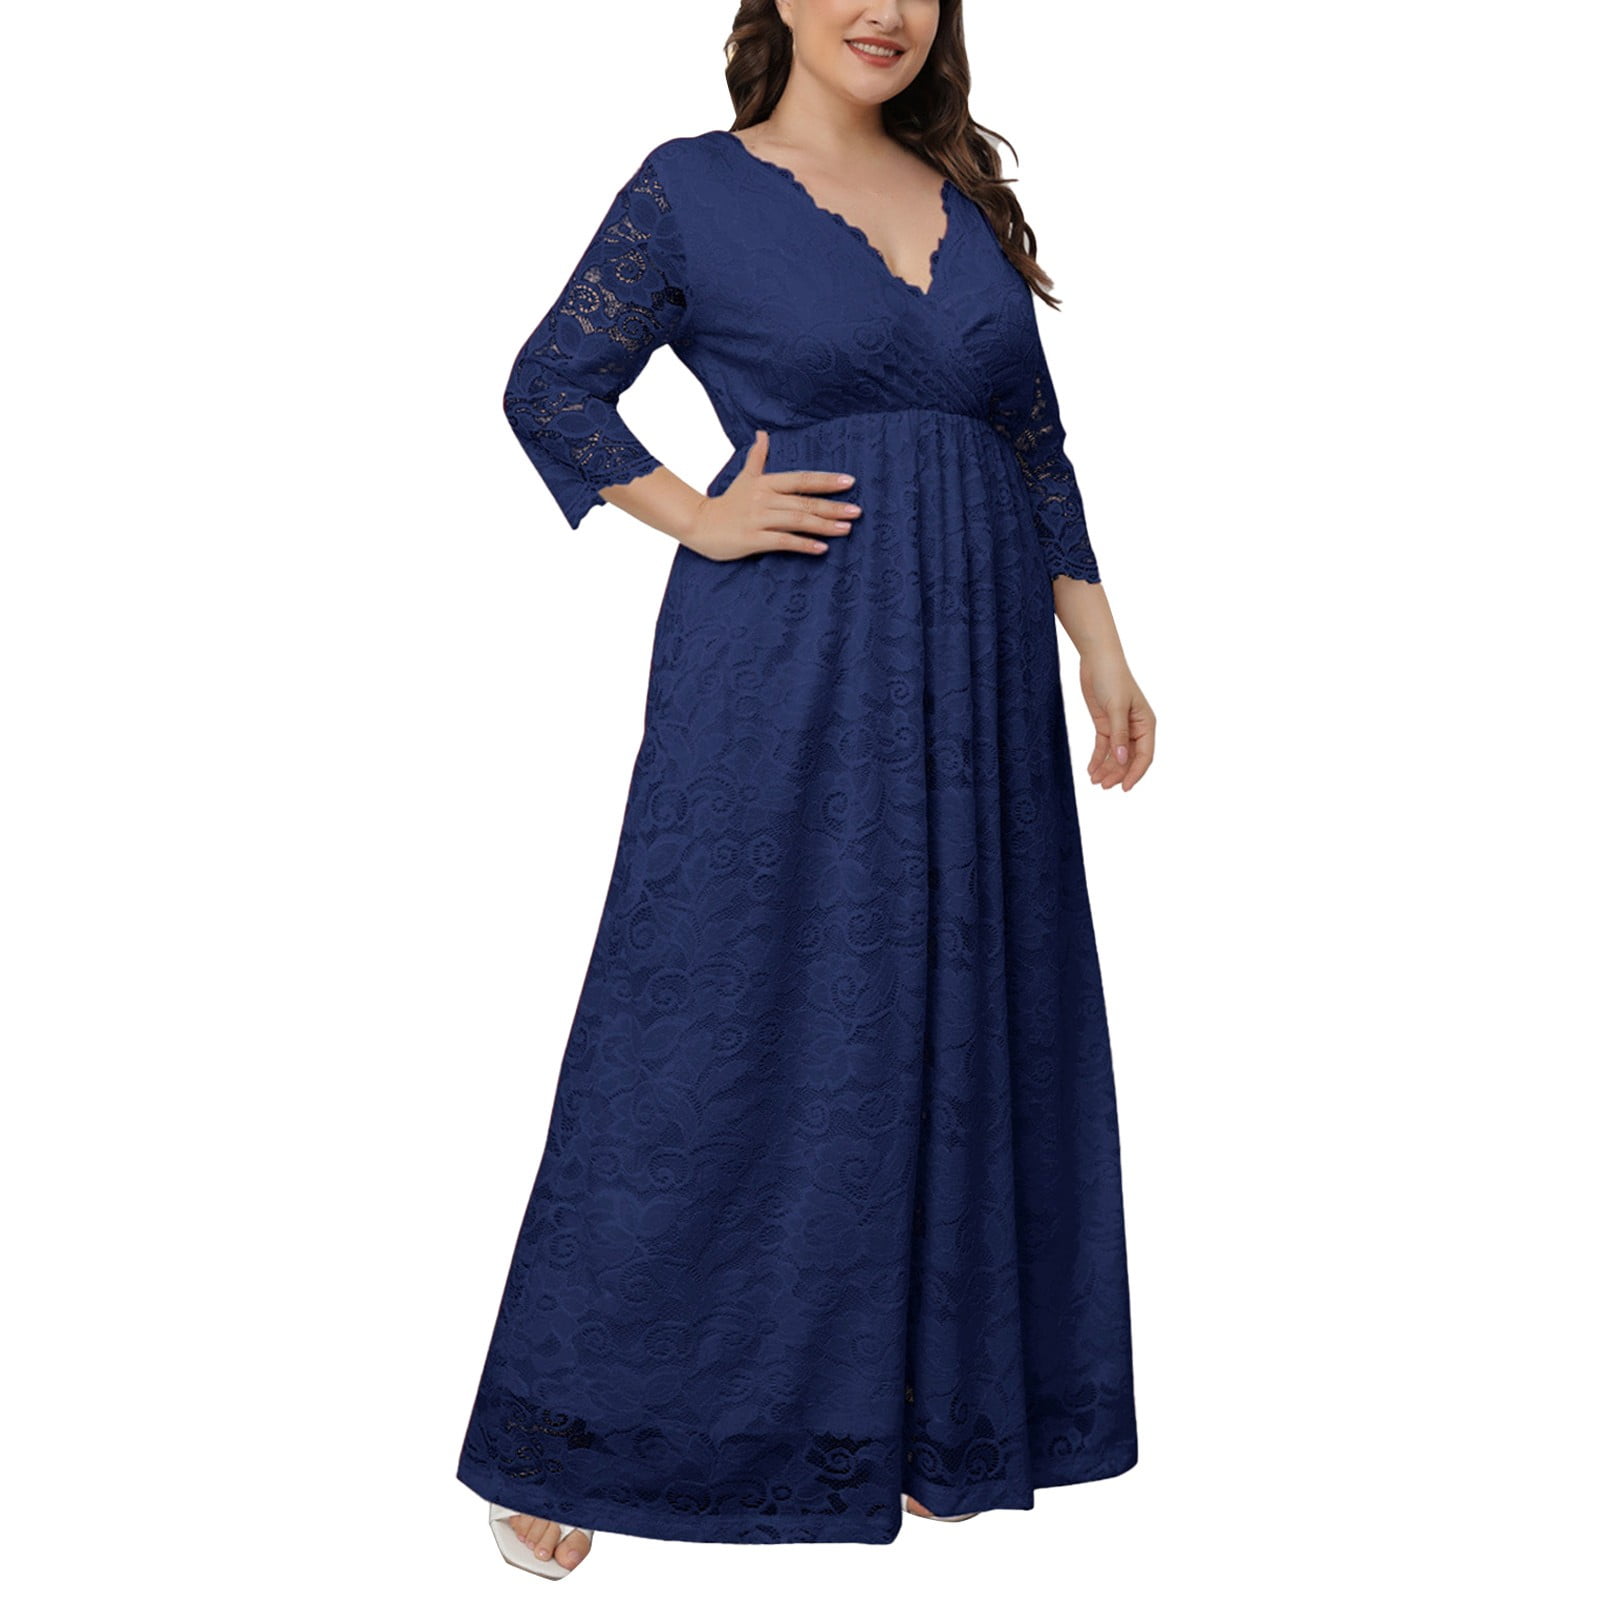 Women Summer L- 5x Plus Size Maxi Dress Long Dresses With Pockets - China  Wholesale Sexy Dresses,dresses,plus Size Dress $6.6 from Wild Horse Group  Co.,Ltd